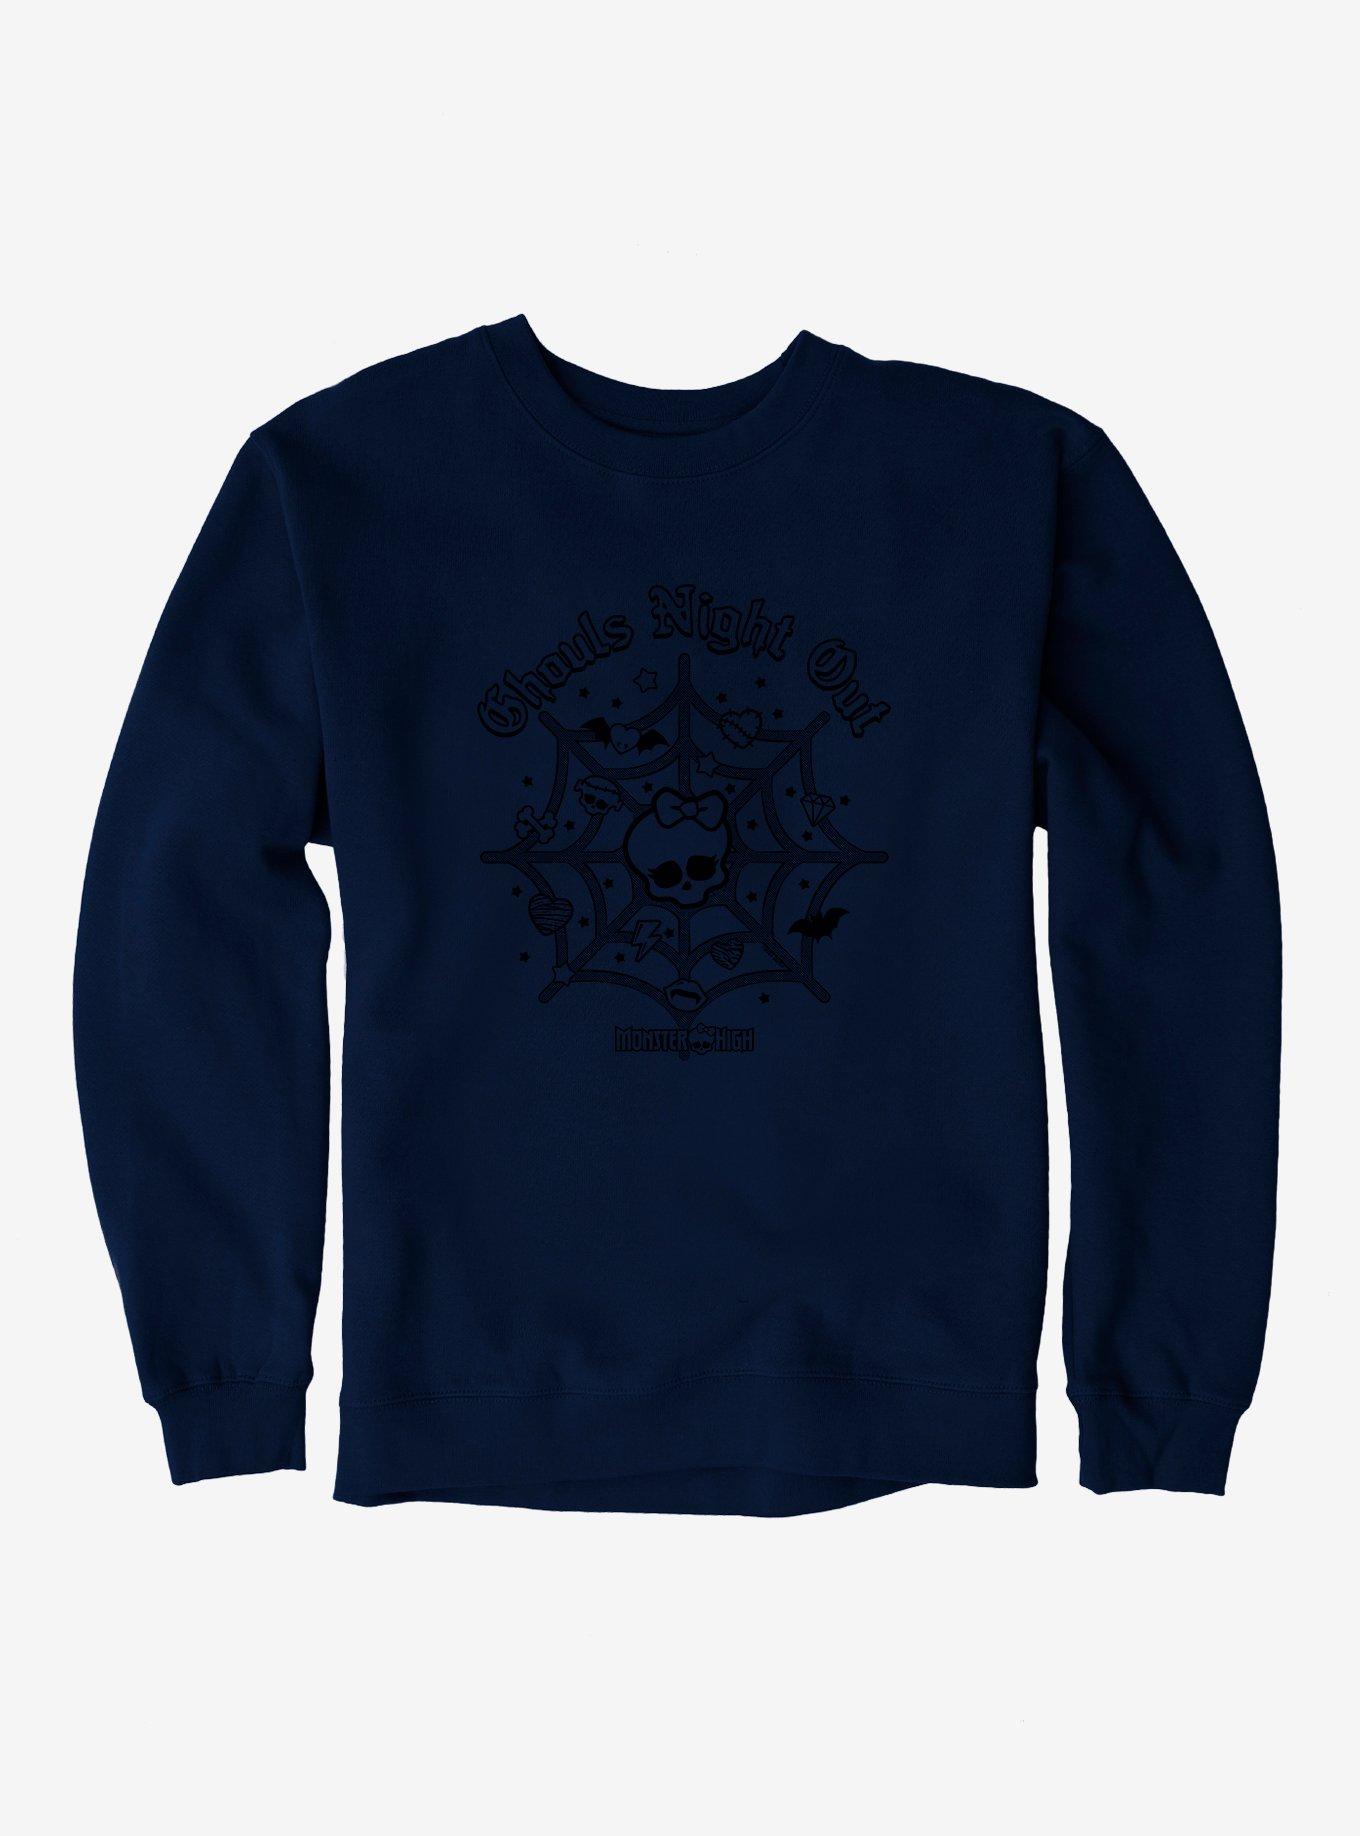 Monster High Ghouls Night Out Spiderweb Sweatshirt, NAVY, hi-res